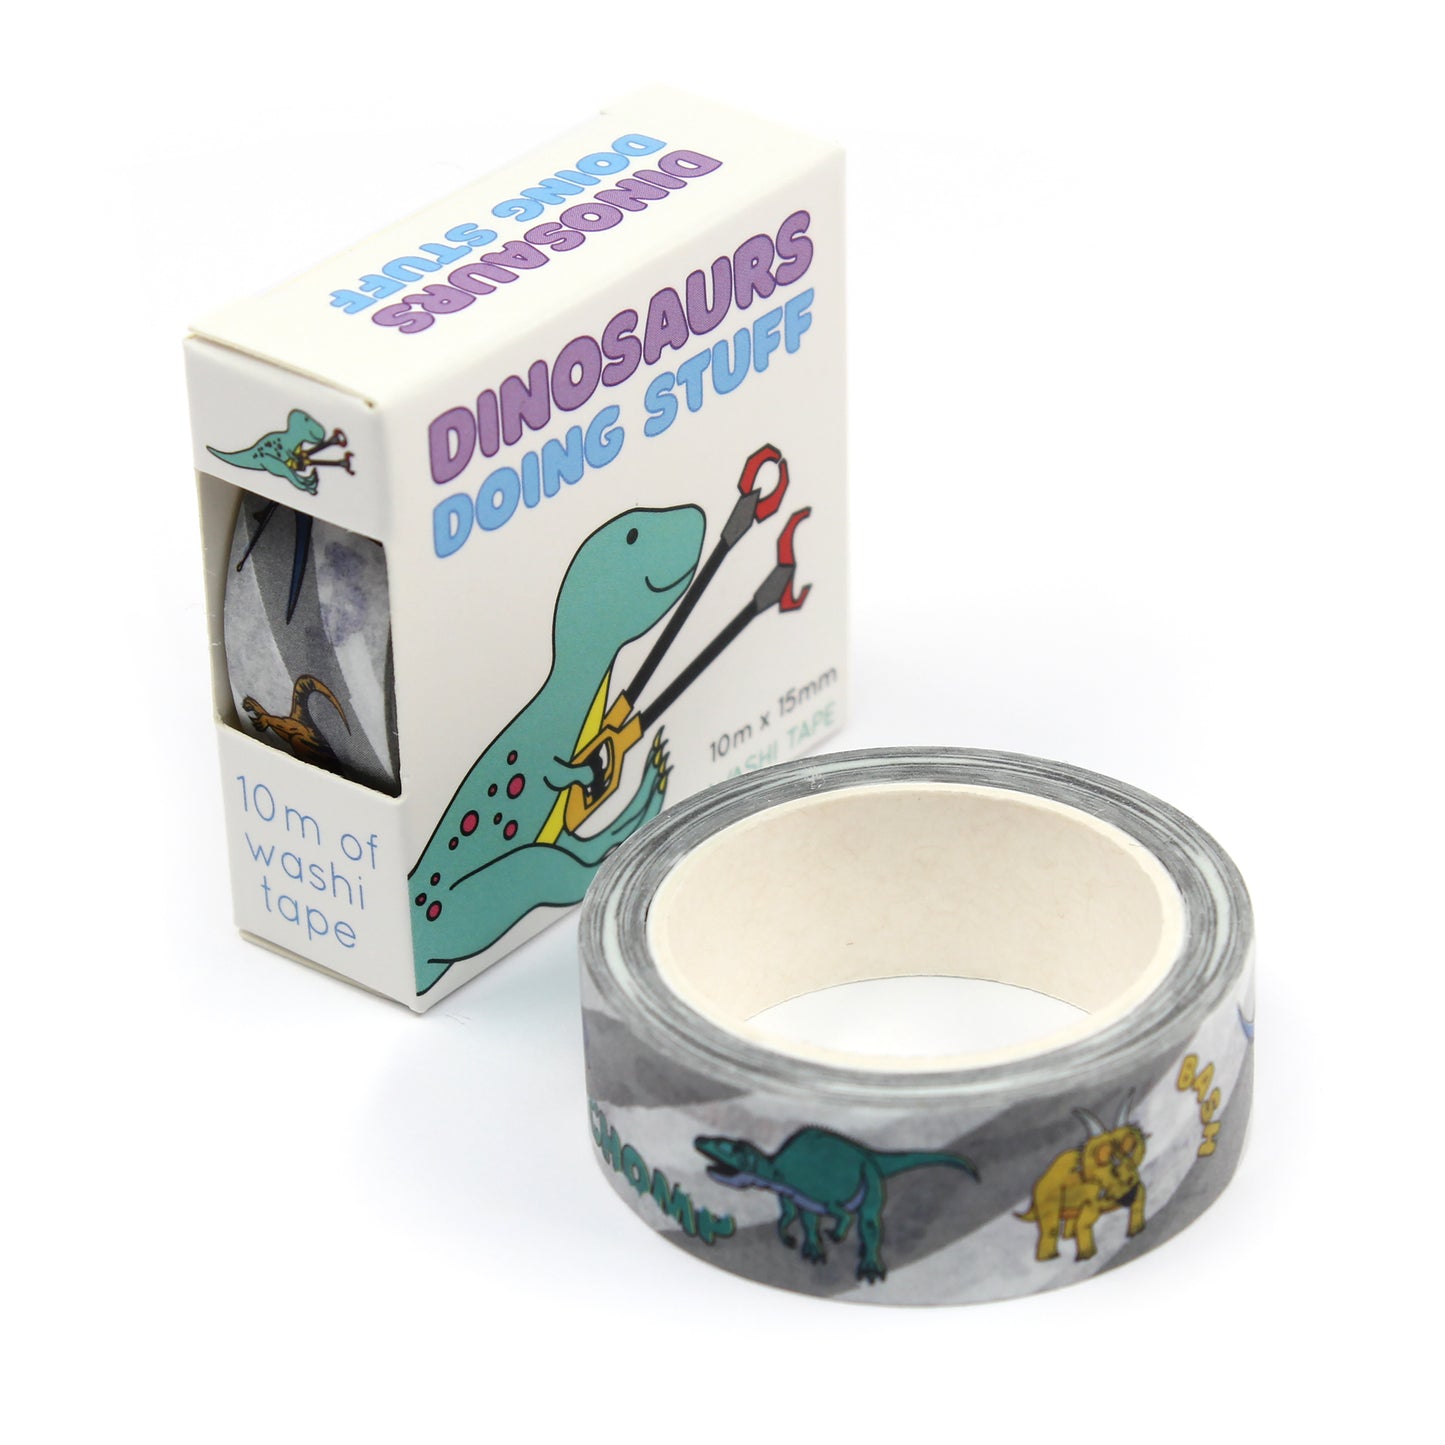 A roll of dinosaur words washi tape with a box of tape behind it